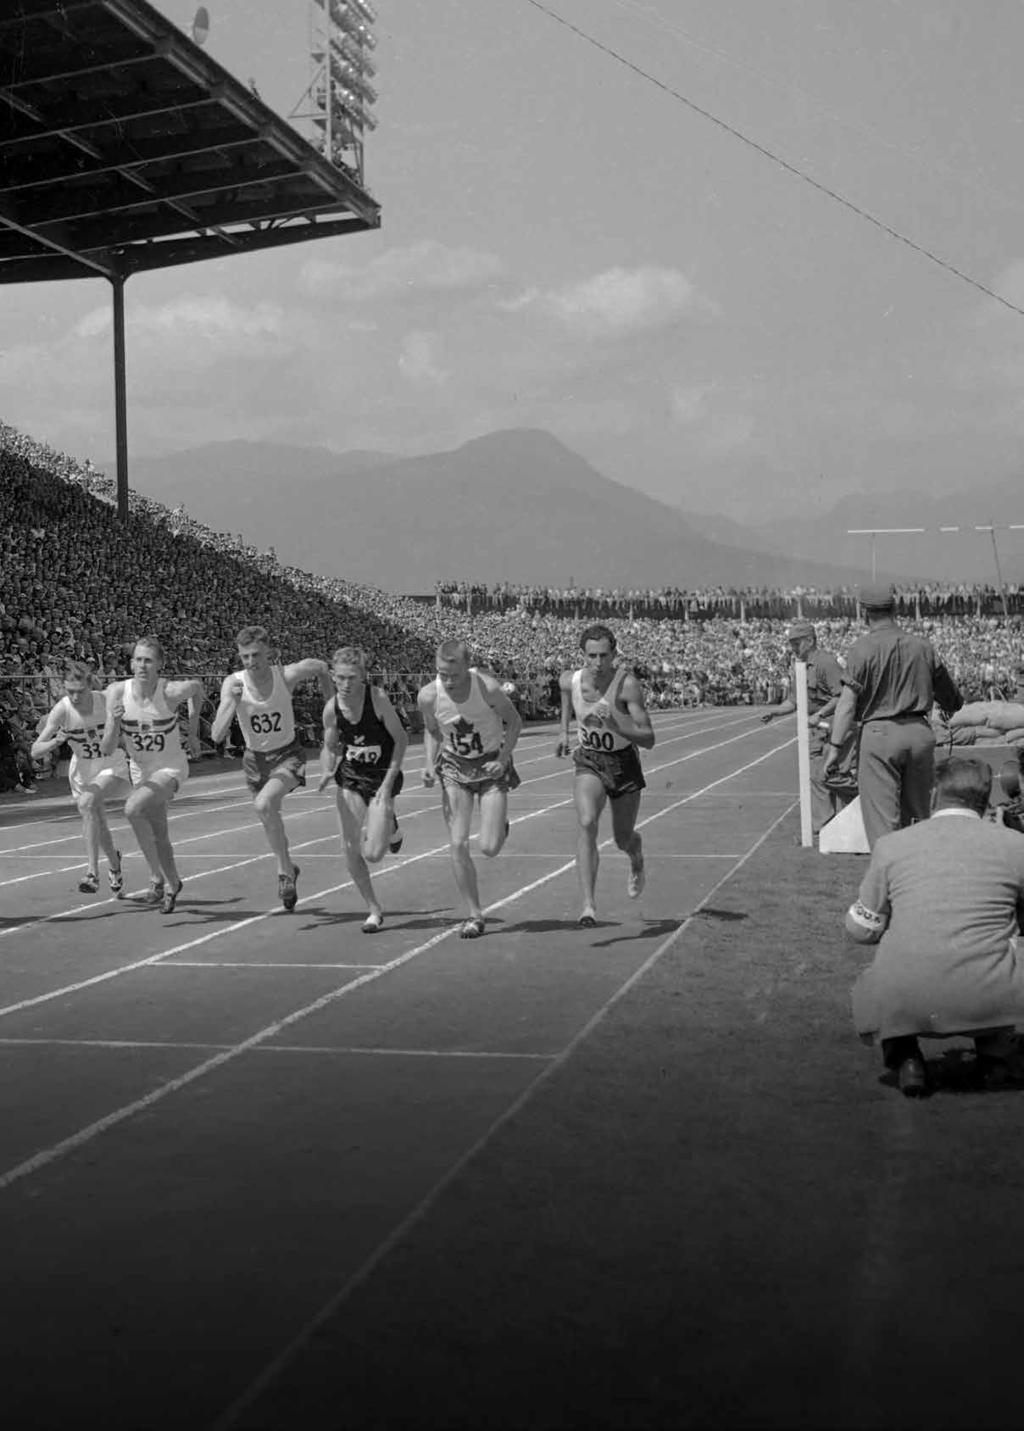 John Landy (No.300) and Roger Bannister (No.329) compete in the Miracle Mile race during the 1954 British Empire and Commonwealth Games in Vancouver. over 6,600 athletes and team officials.